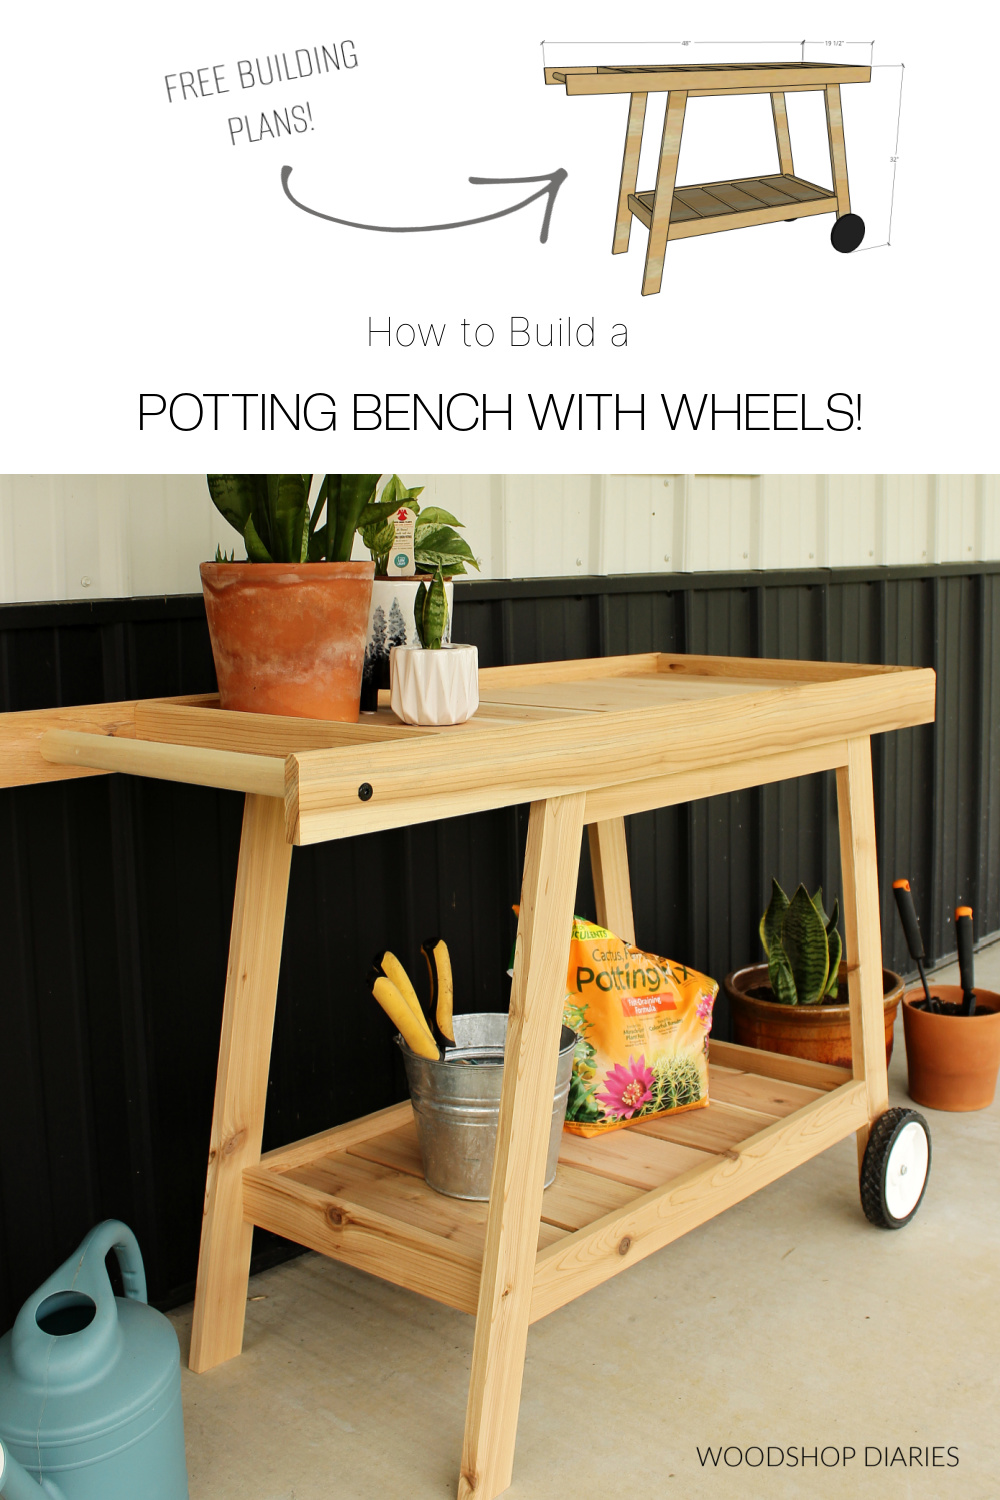 Pinterest collage showing completed DIY mobile potting bench at bottom with overall dimensional diagram at top with text "how to build a potting bench with wheels"